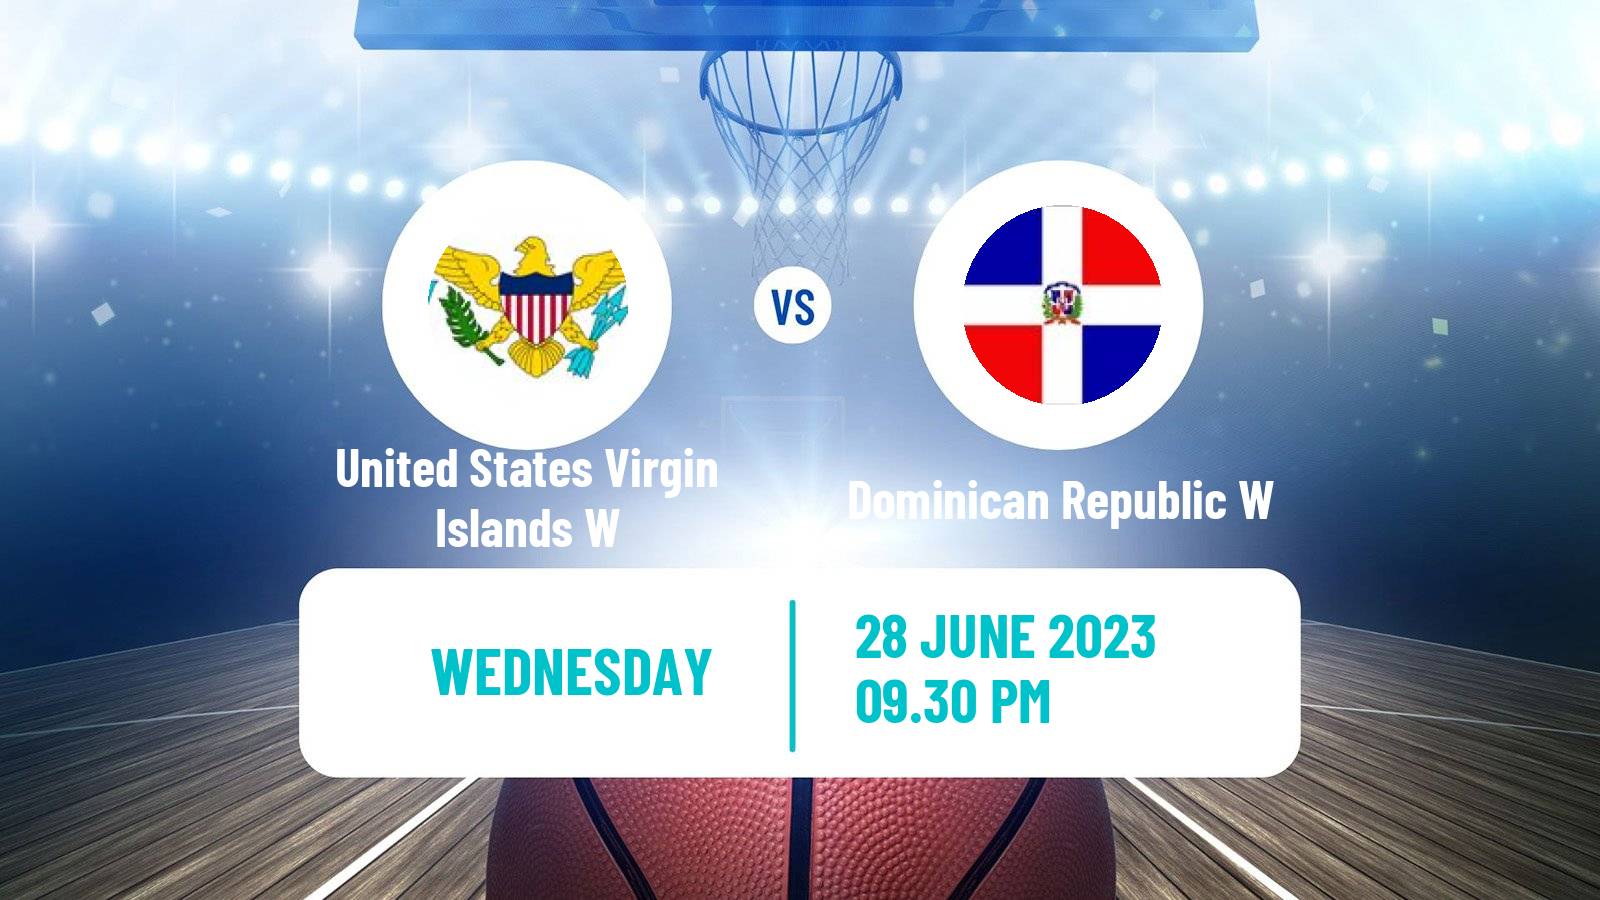 Basketball Central American and Caribbean Games Basketball Women United States Virgin Islands W - Dominican Republic W